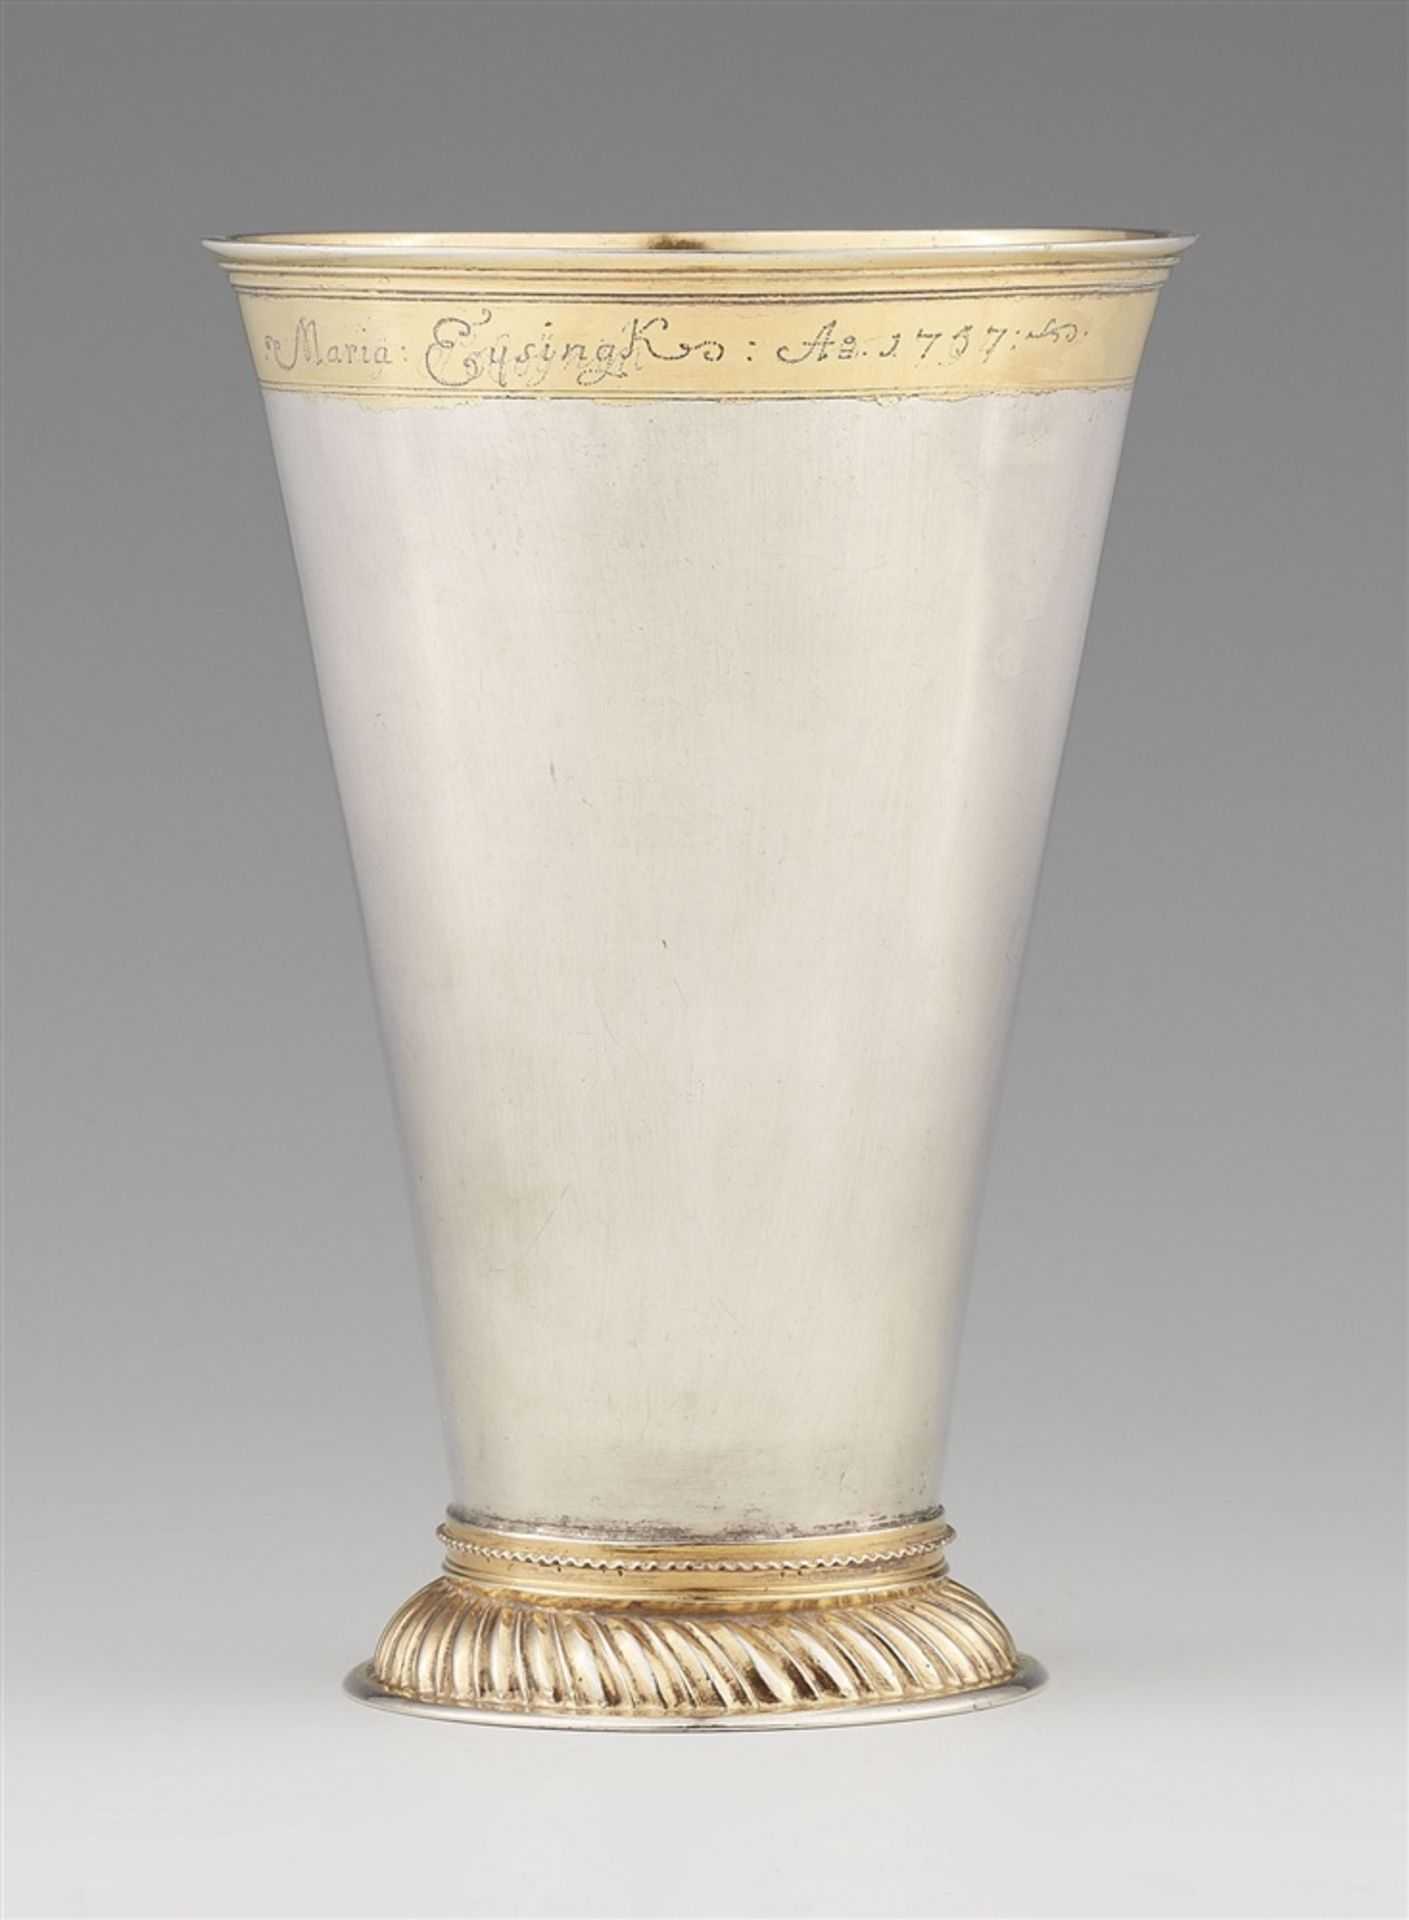 A Riga silver beakerParcel-gilt silver beaker on a domed gadrooned base. With owner's engraving